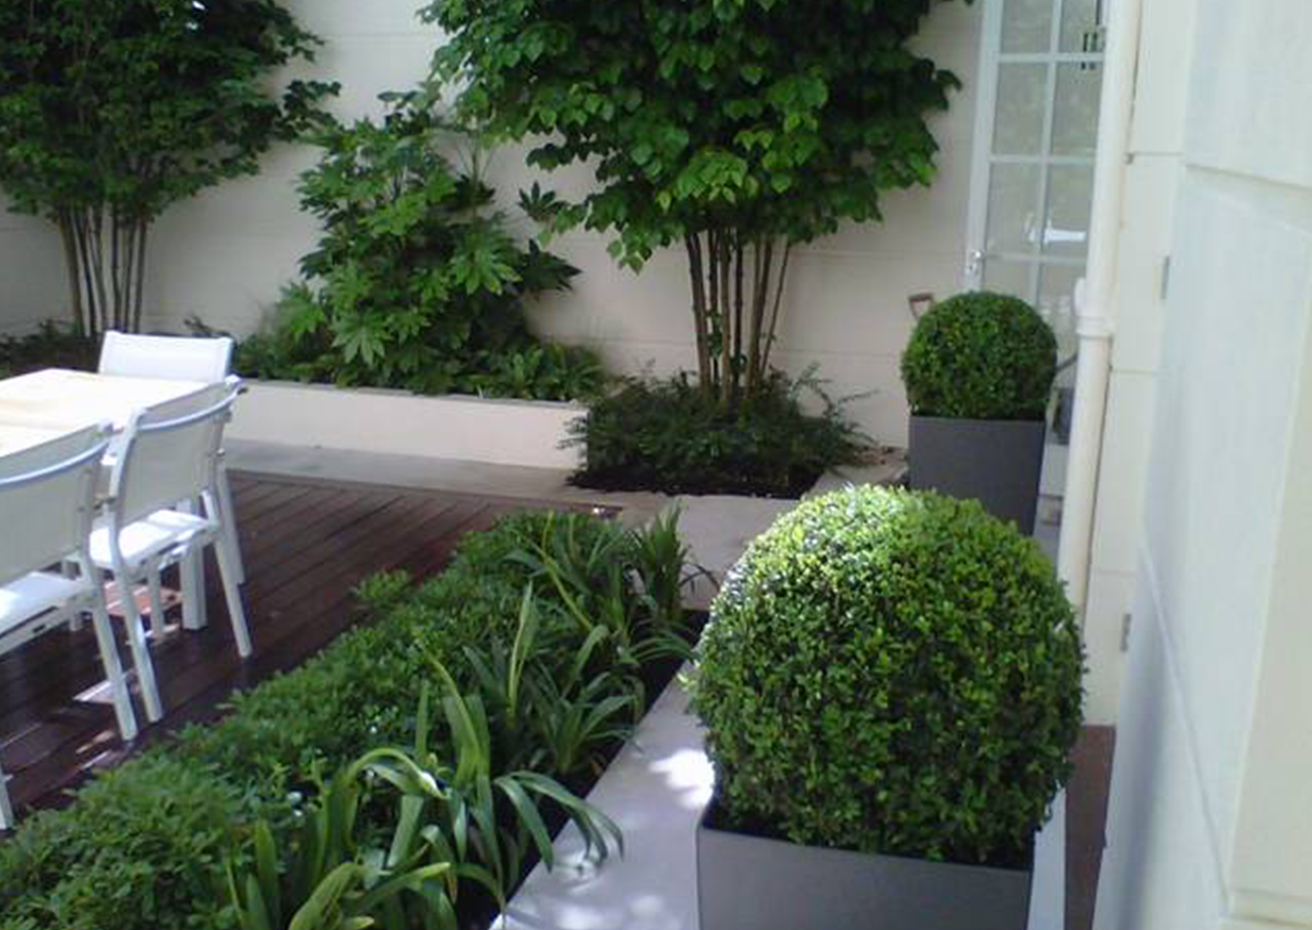 Landscaping services in Launceston